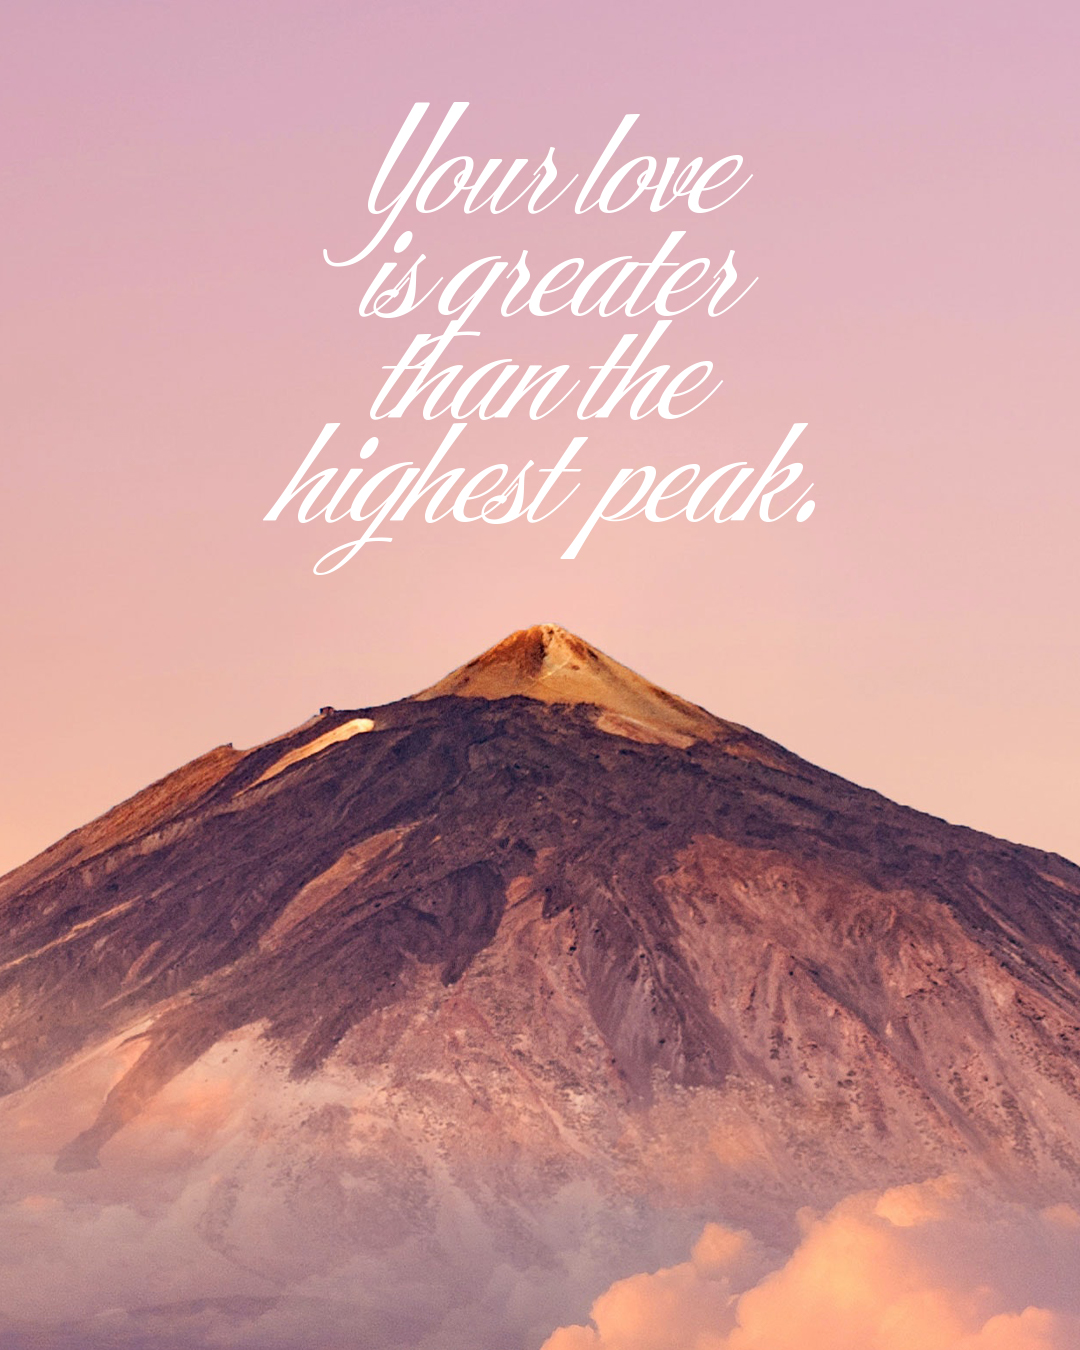 Your love is greater than the highest peak